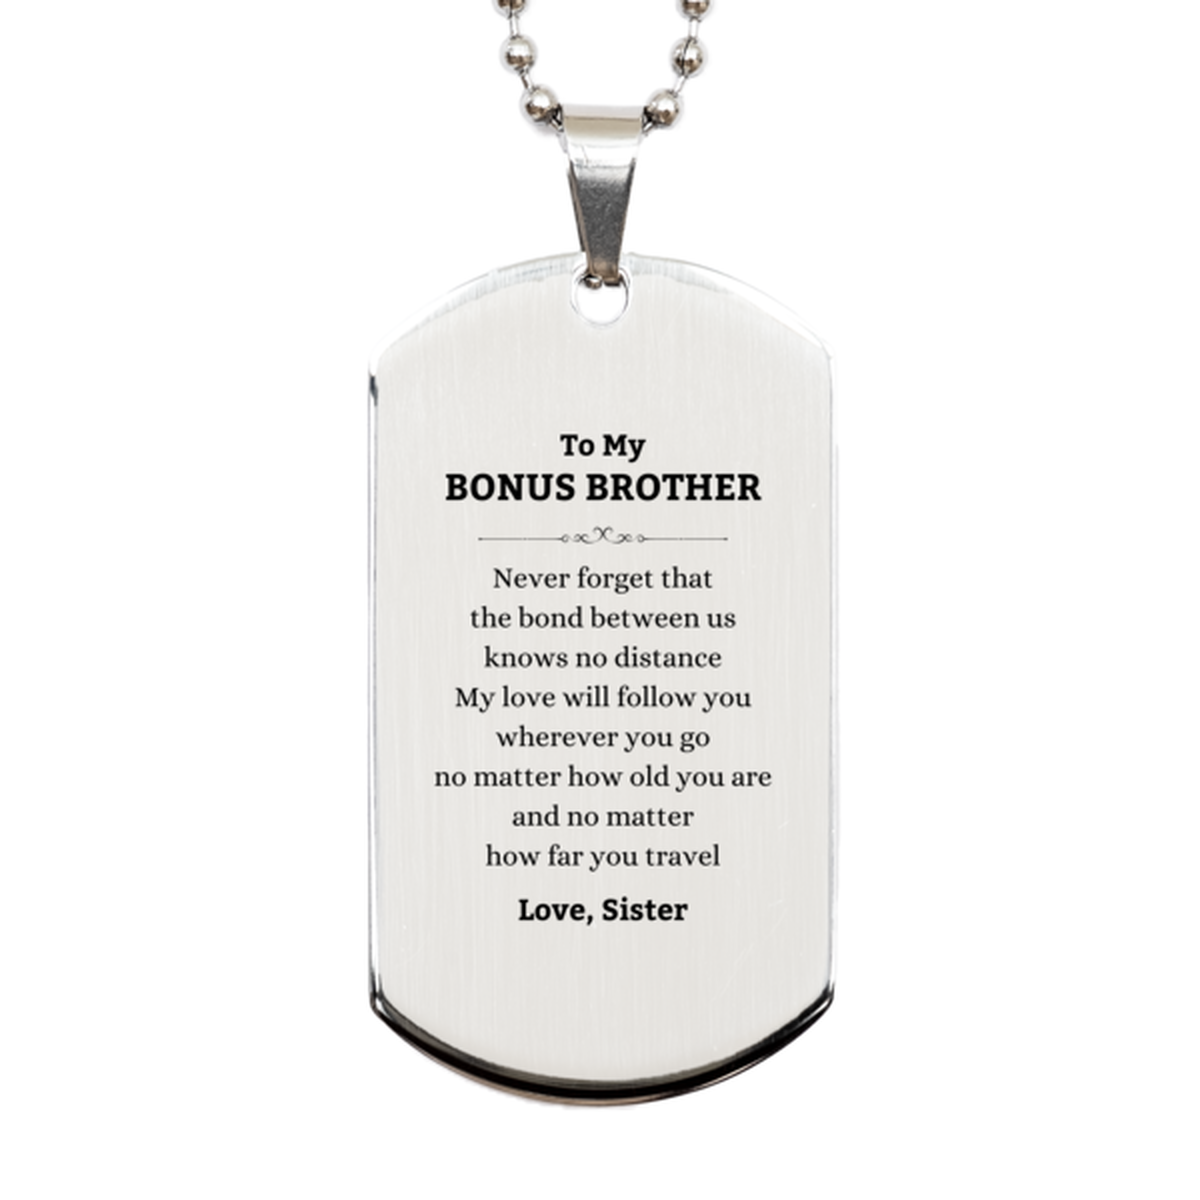 Bonus Brother Birthday Gifts from Sister, Adjustable Silver Dog Tag for Bonus Brother Christmas Graduation Unique Gifts Bonus Brother Never forget that the bond between us knows no distance. Love, Sister